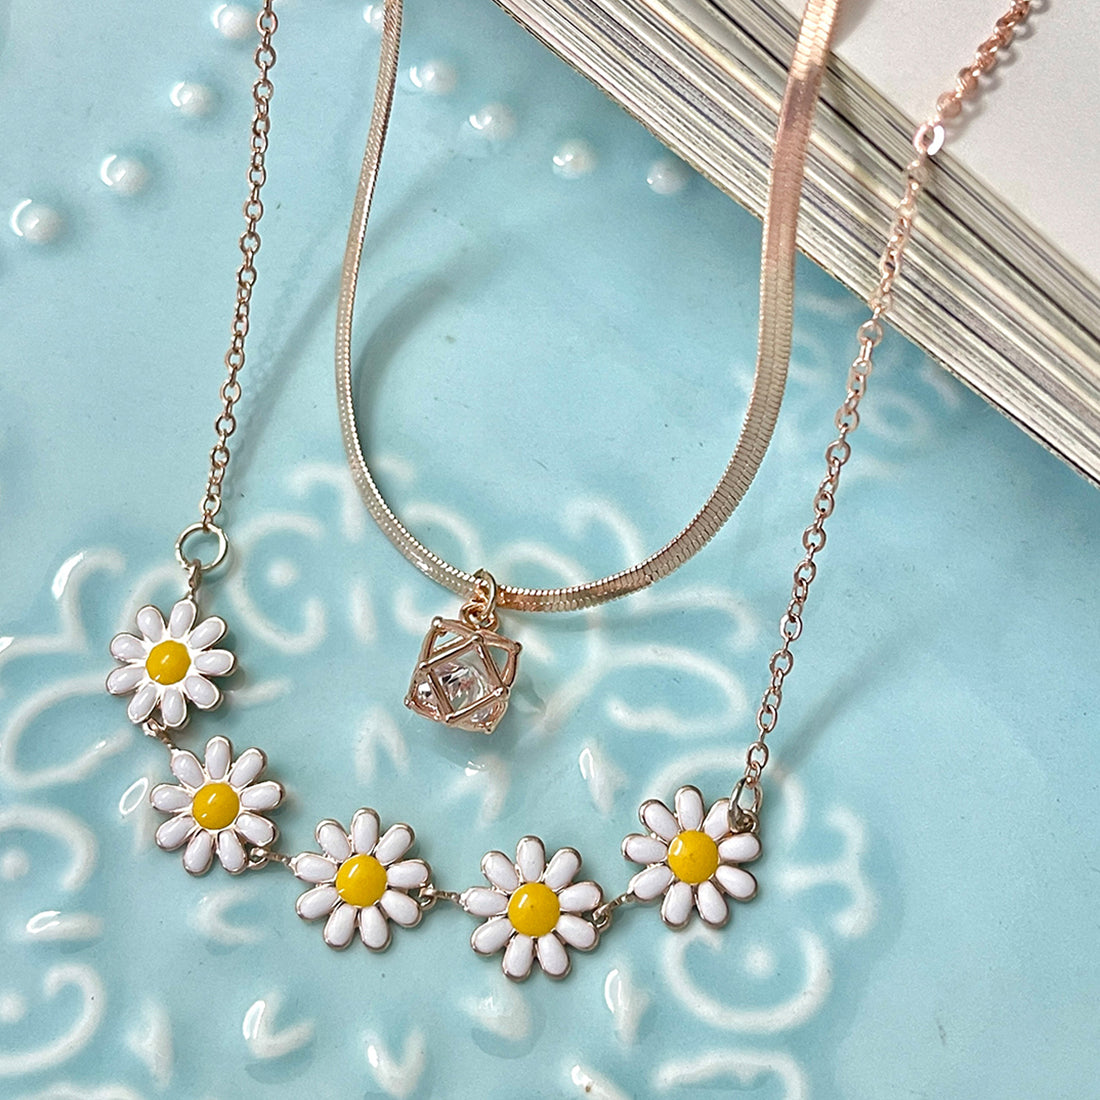 Enamel Flower Charm & Square Diamante Pendant Rose Gold-Toned Snake Chain Layered Necklace